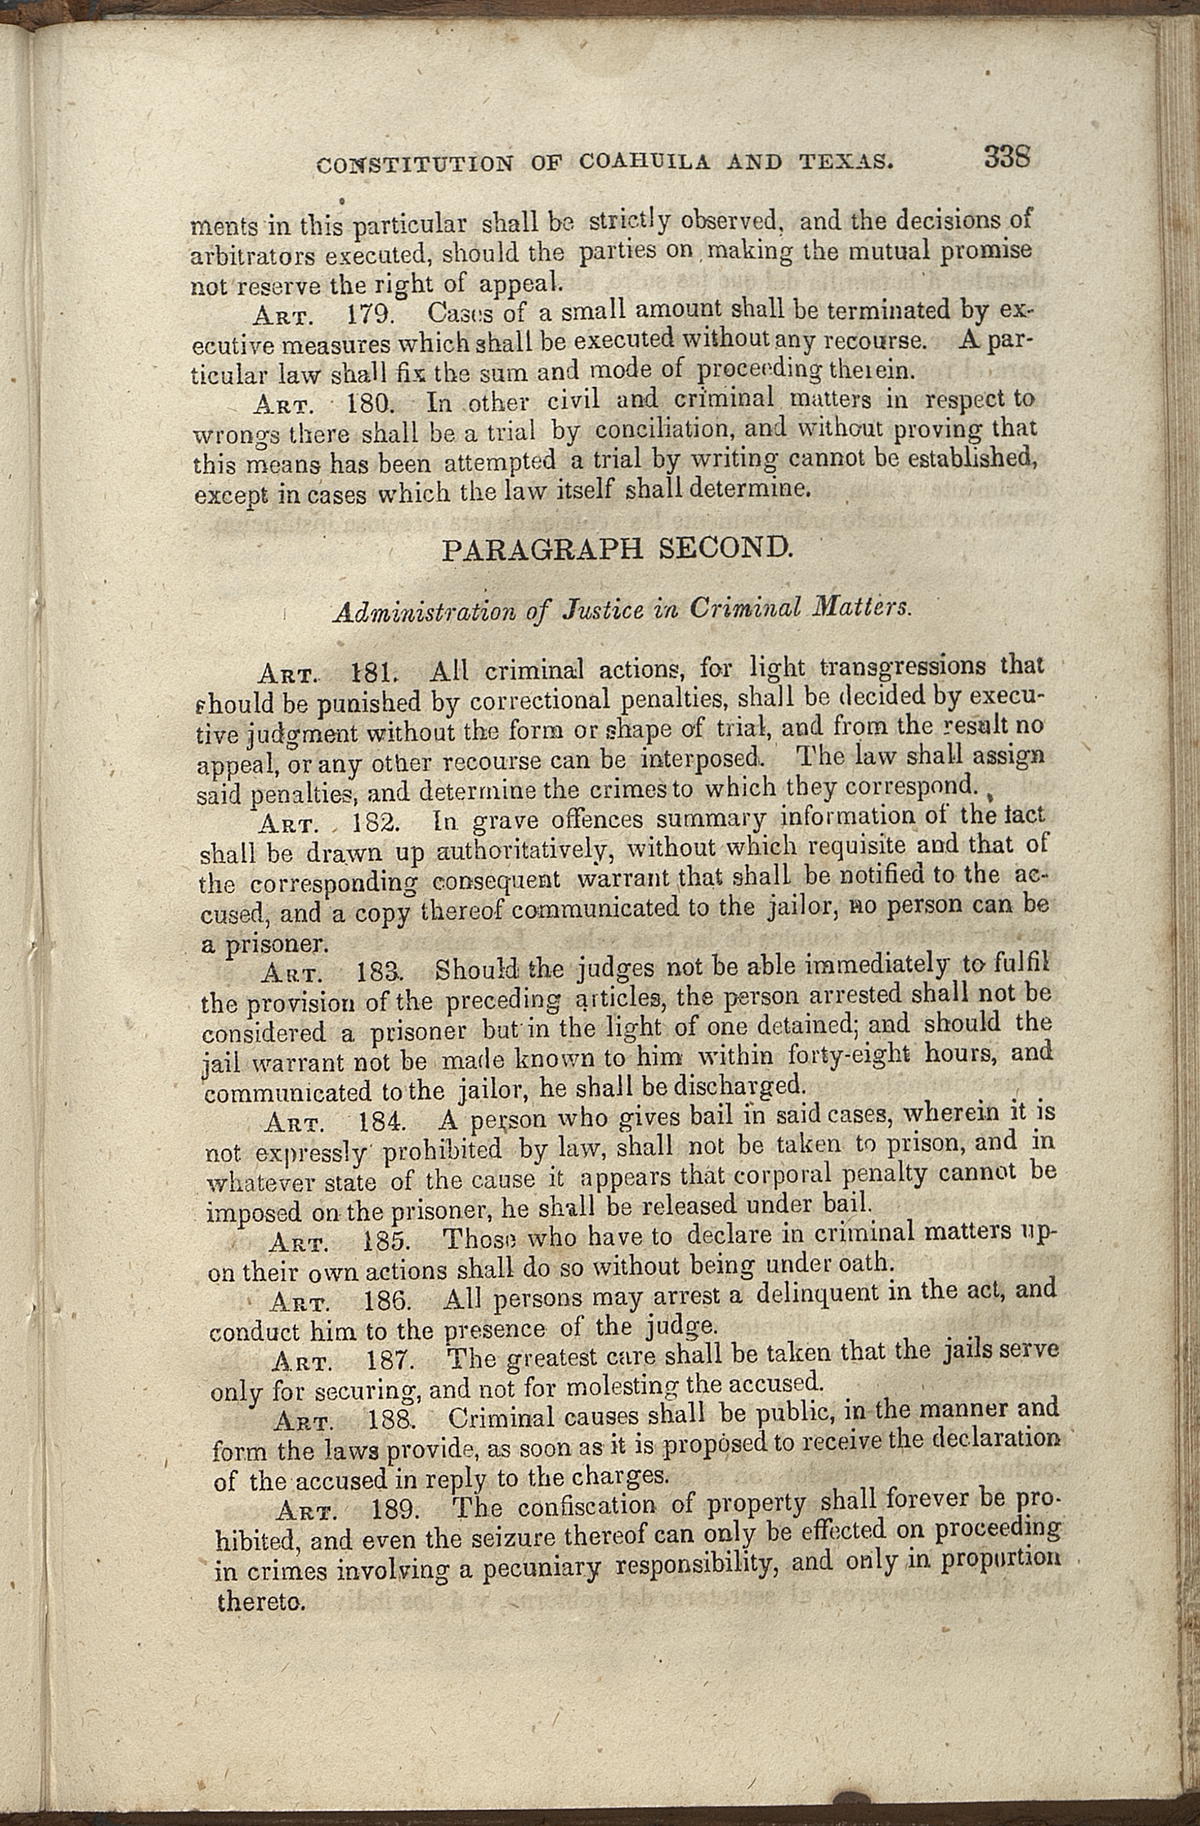 Title III, Sole Section, Articles 178-189